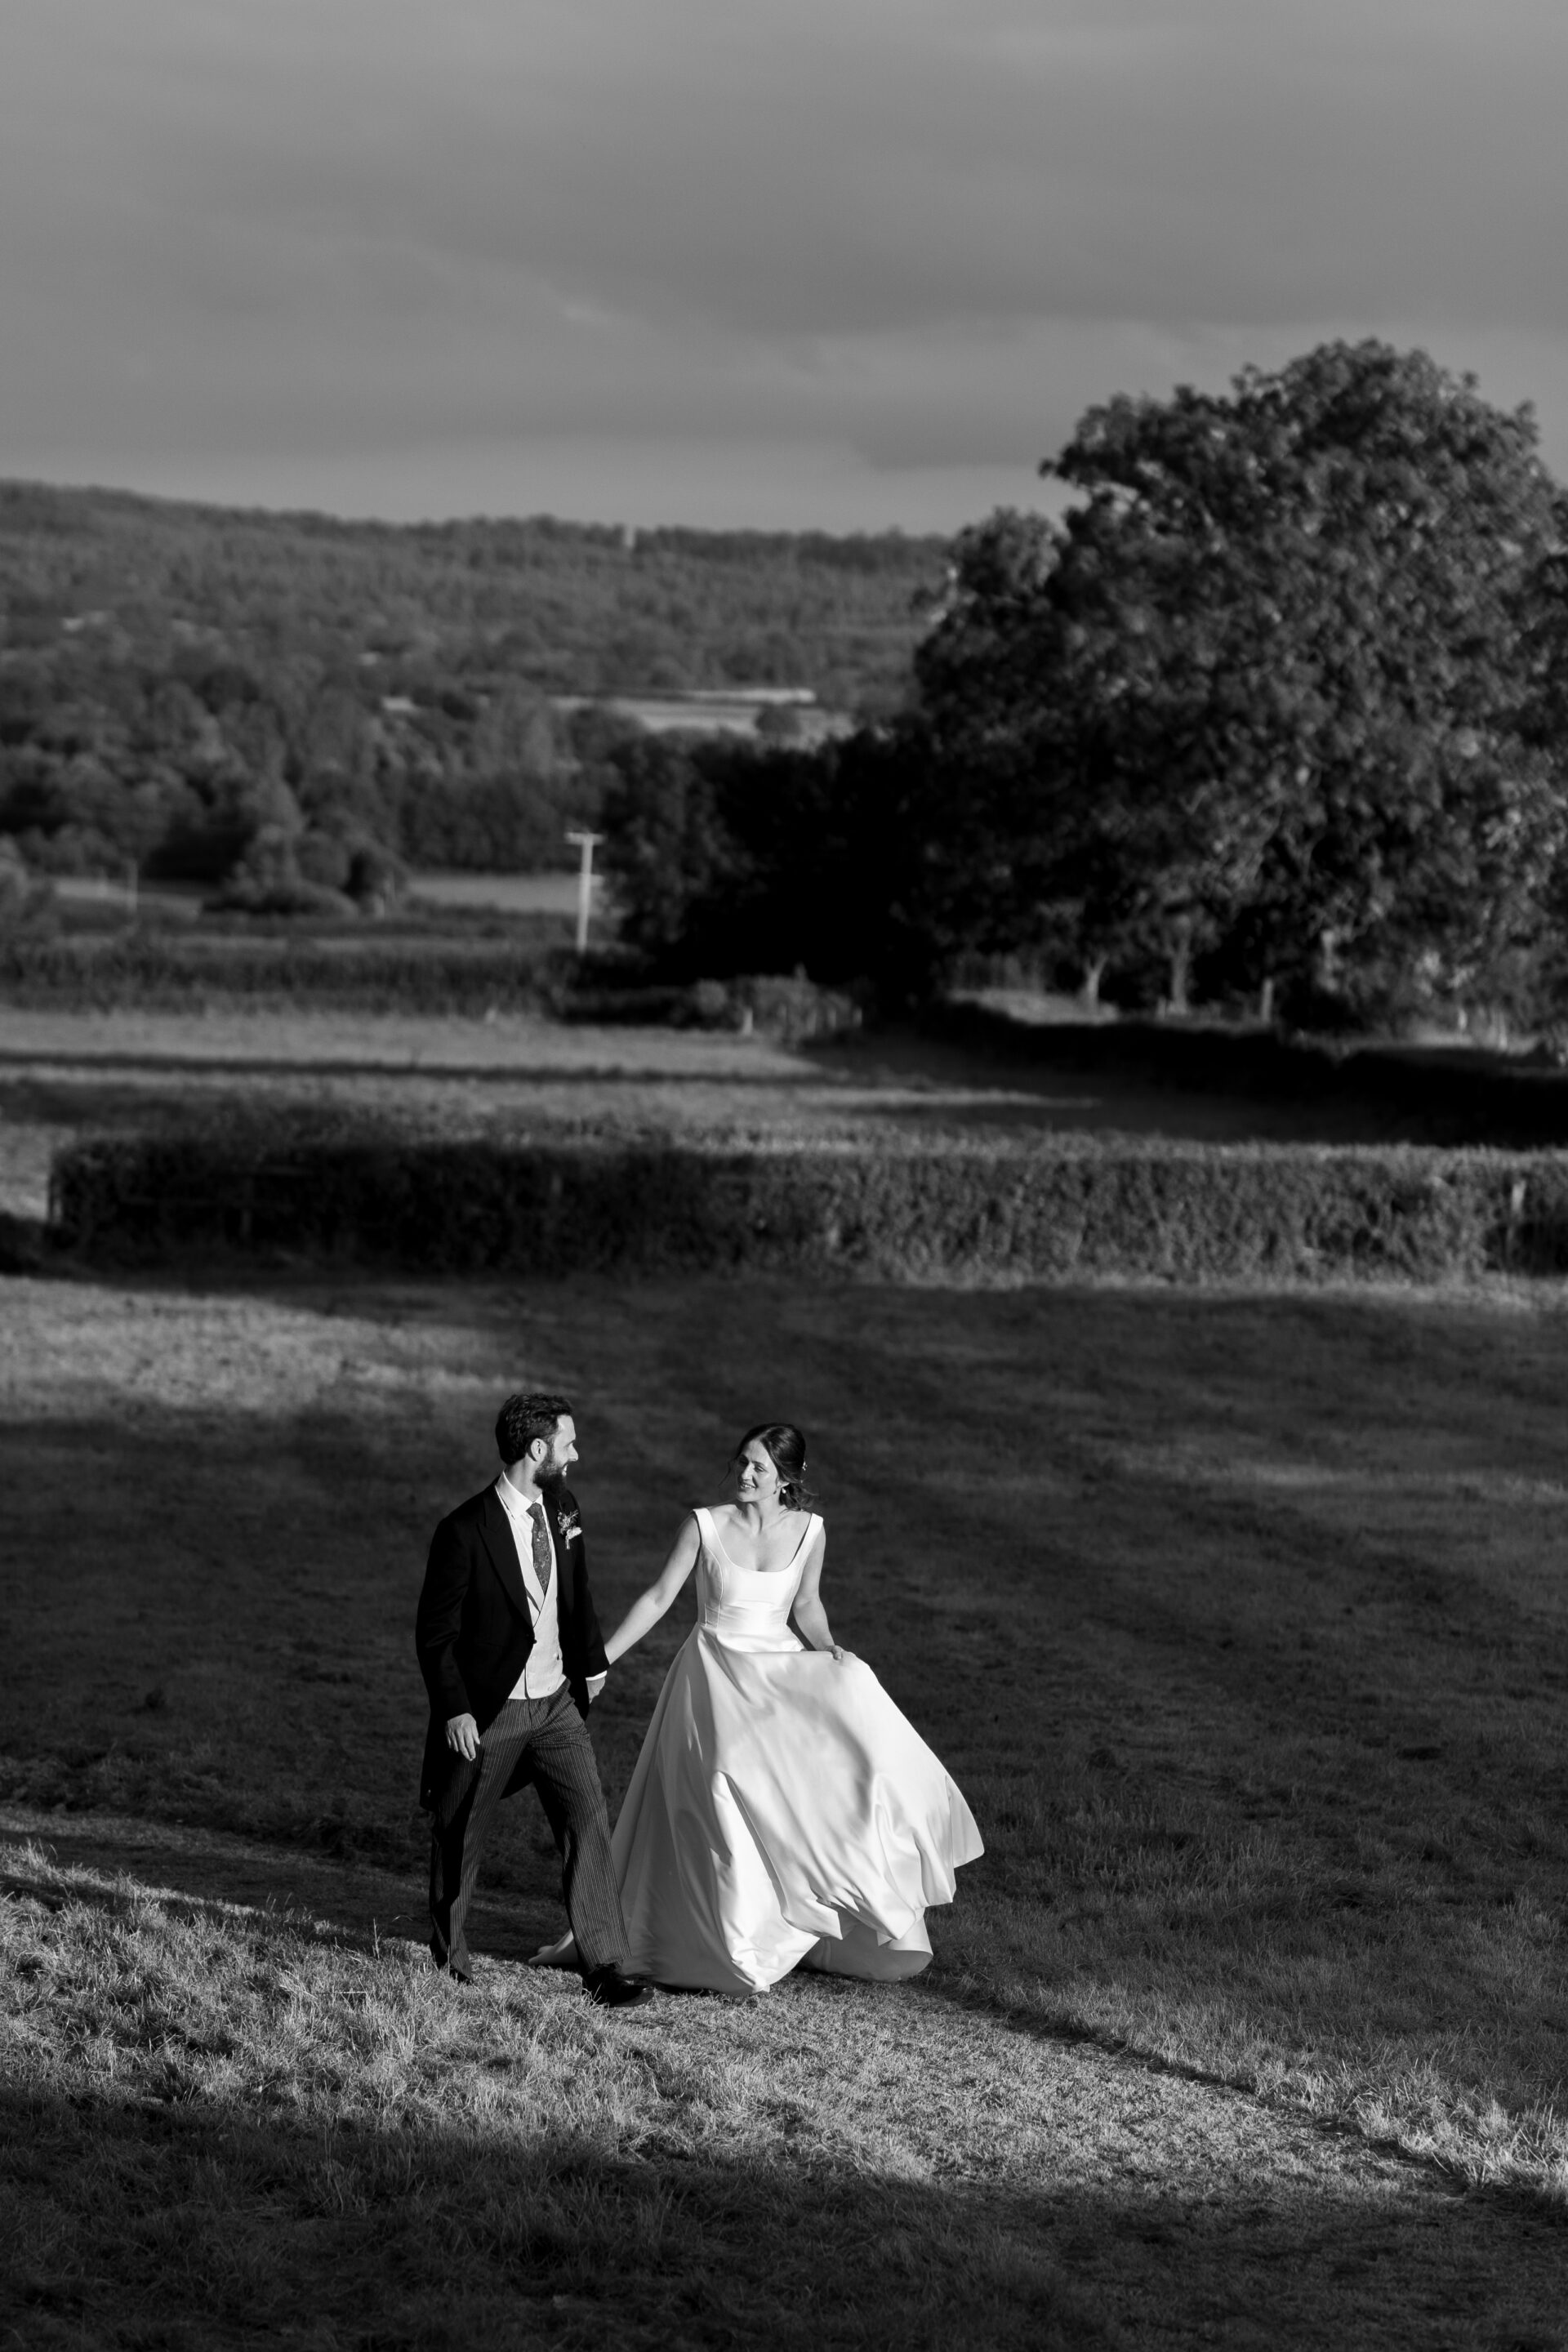 The bride and groom walk back towards the party at their Somerset marquee wedding